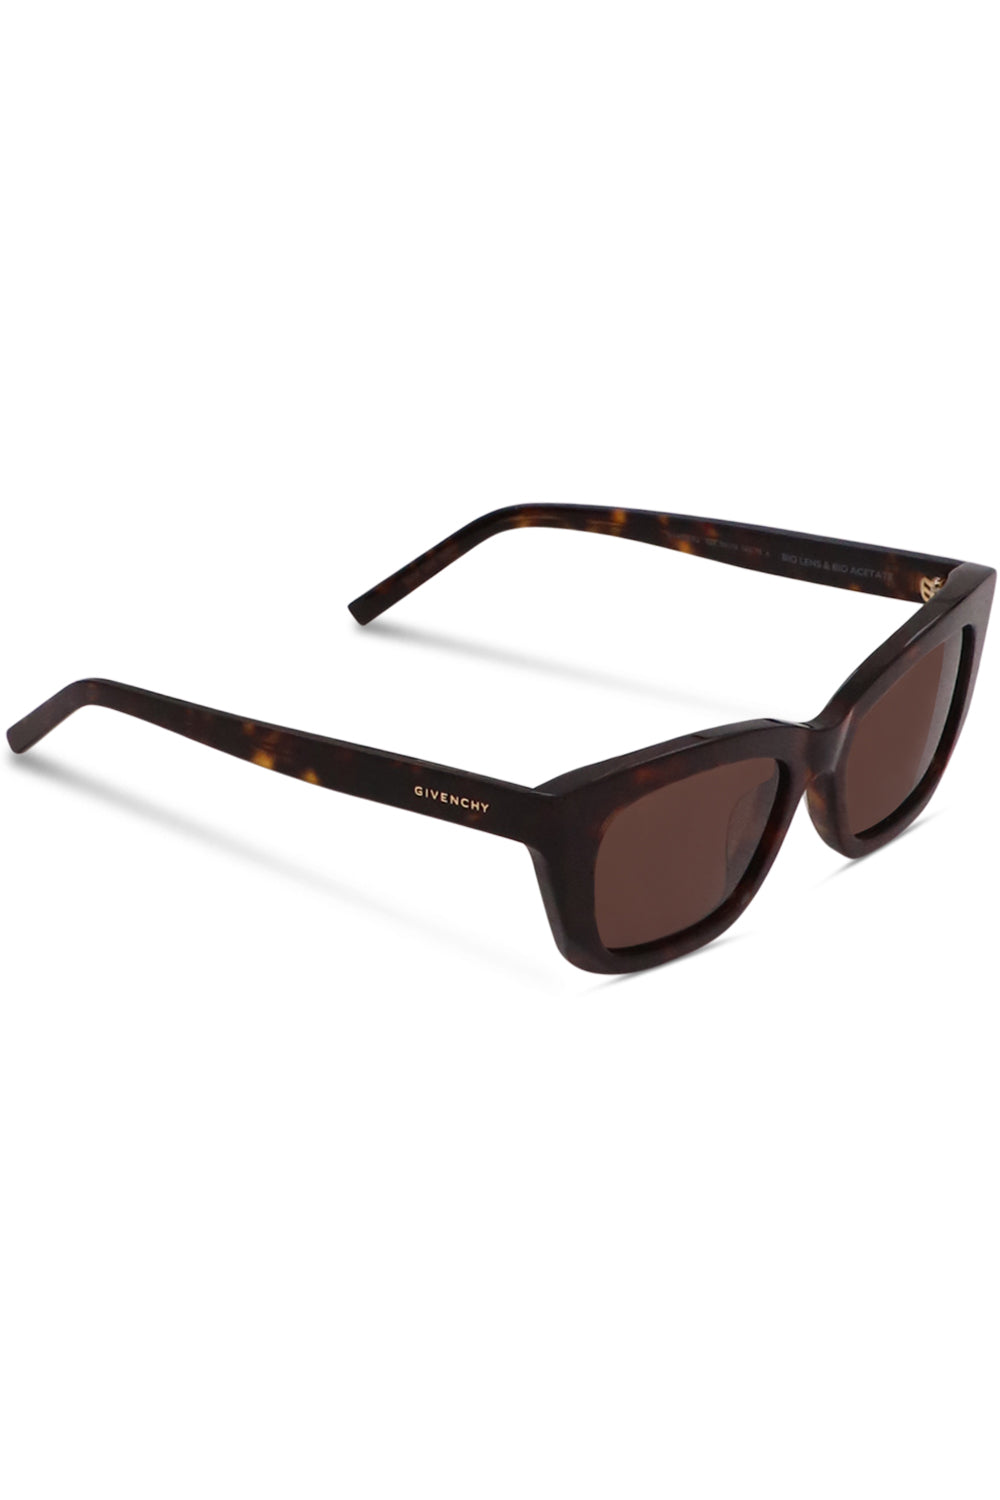 GIVENCHY ACCESSORIES MULTI RECTANGLE SUNGLASSES | HAVANA/BROWN